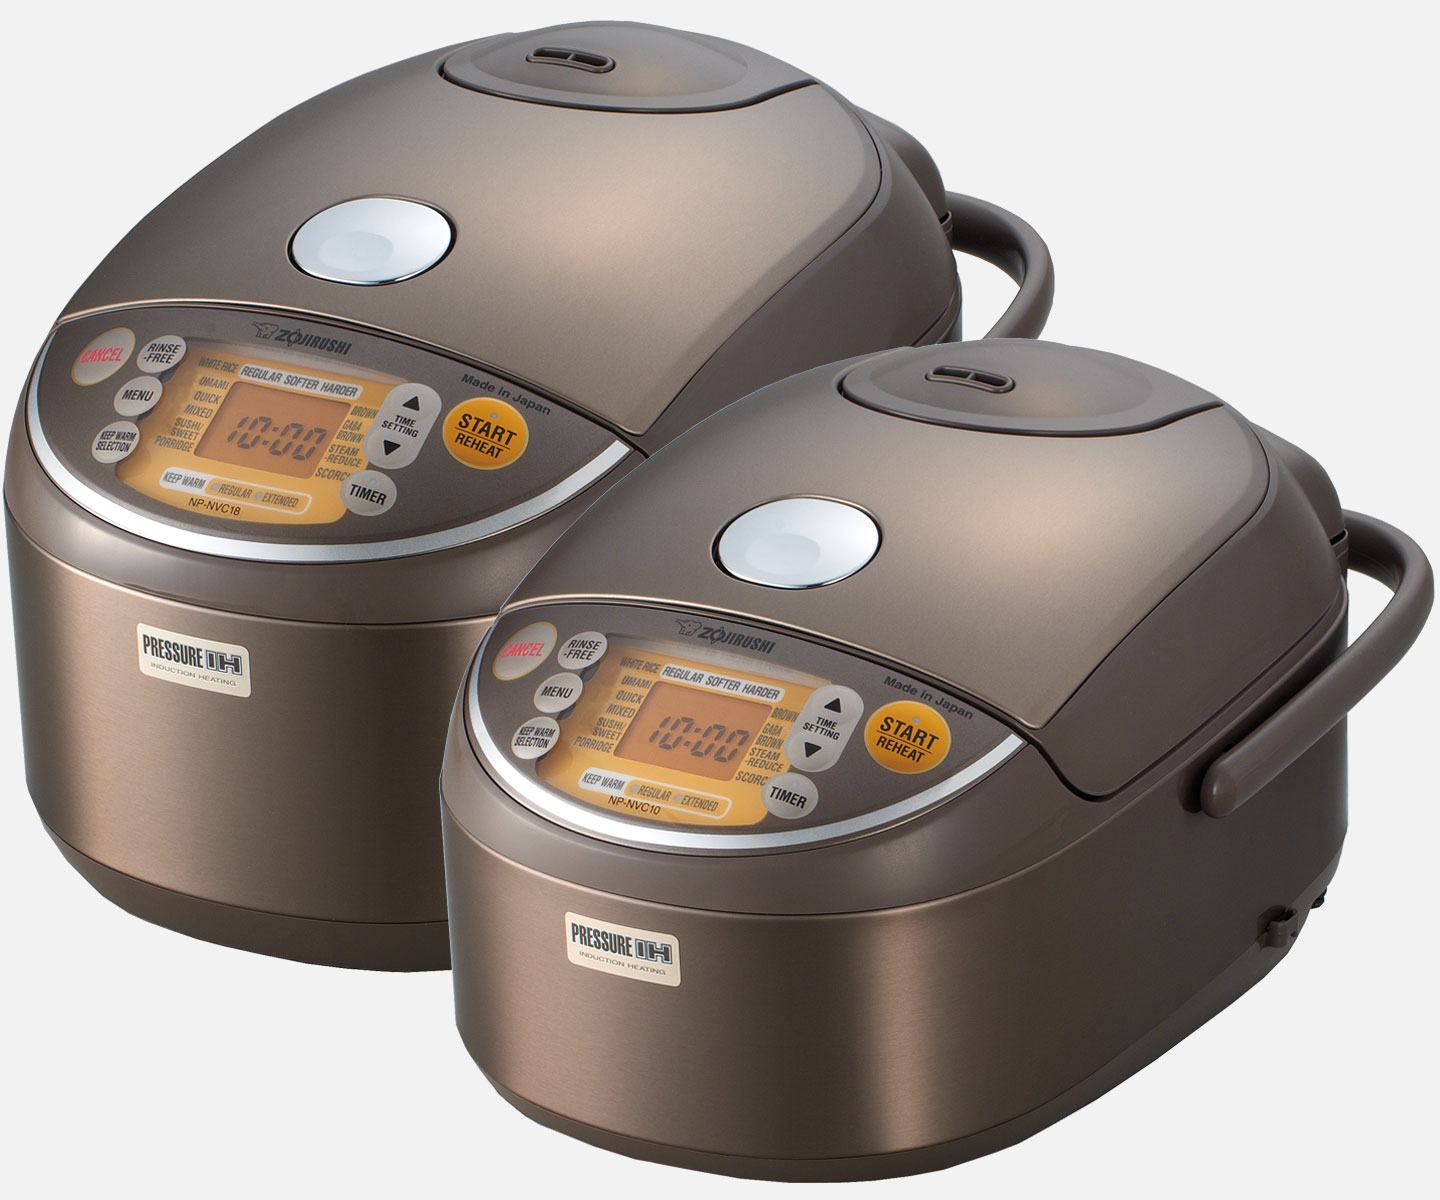 Zojirushi NP-NVC 5.5cups/10cups Induction Heating Pressure Cooker